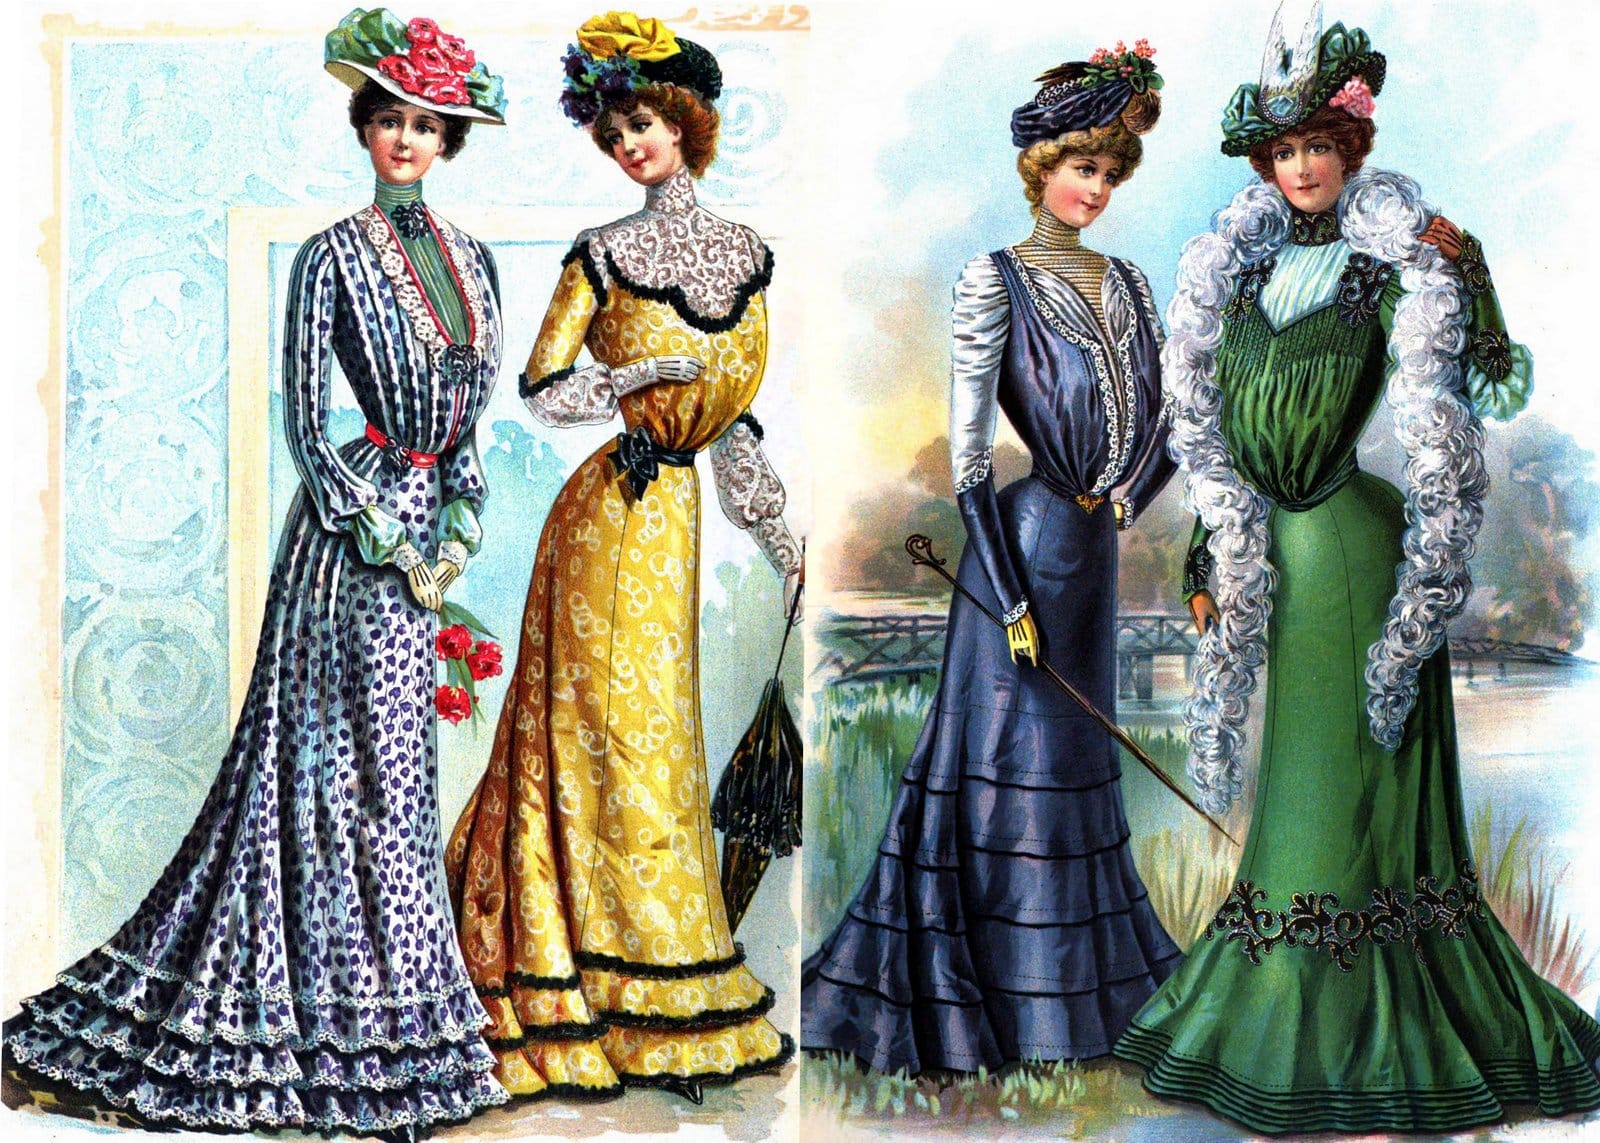 Victorian dresses: Vintage fashion coloring pages from the early 1900s